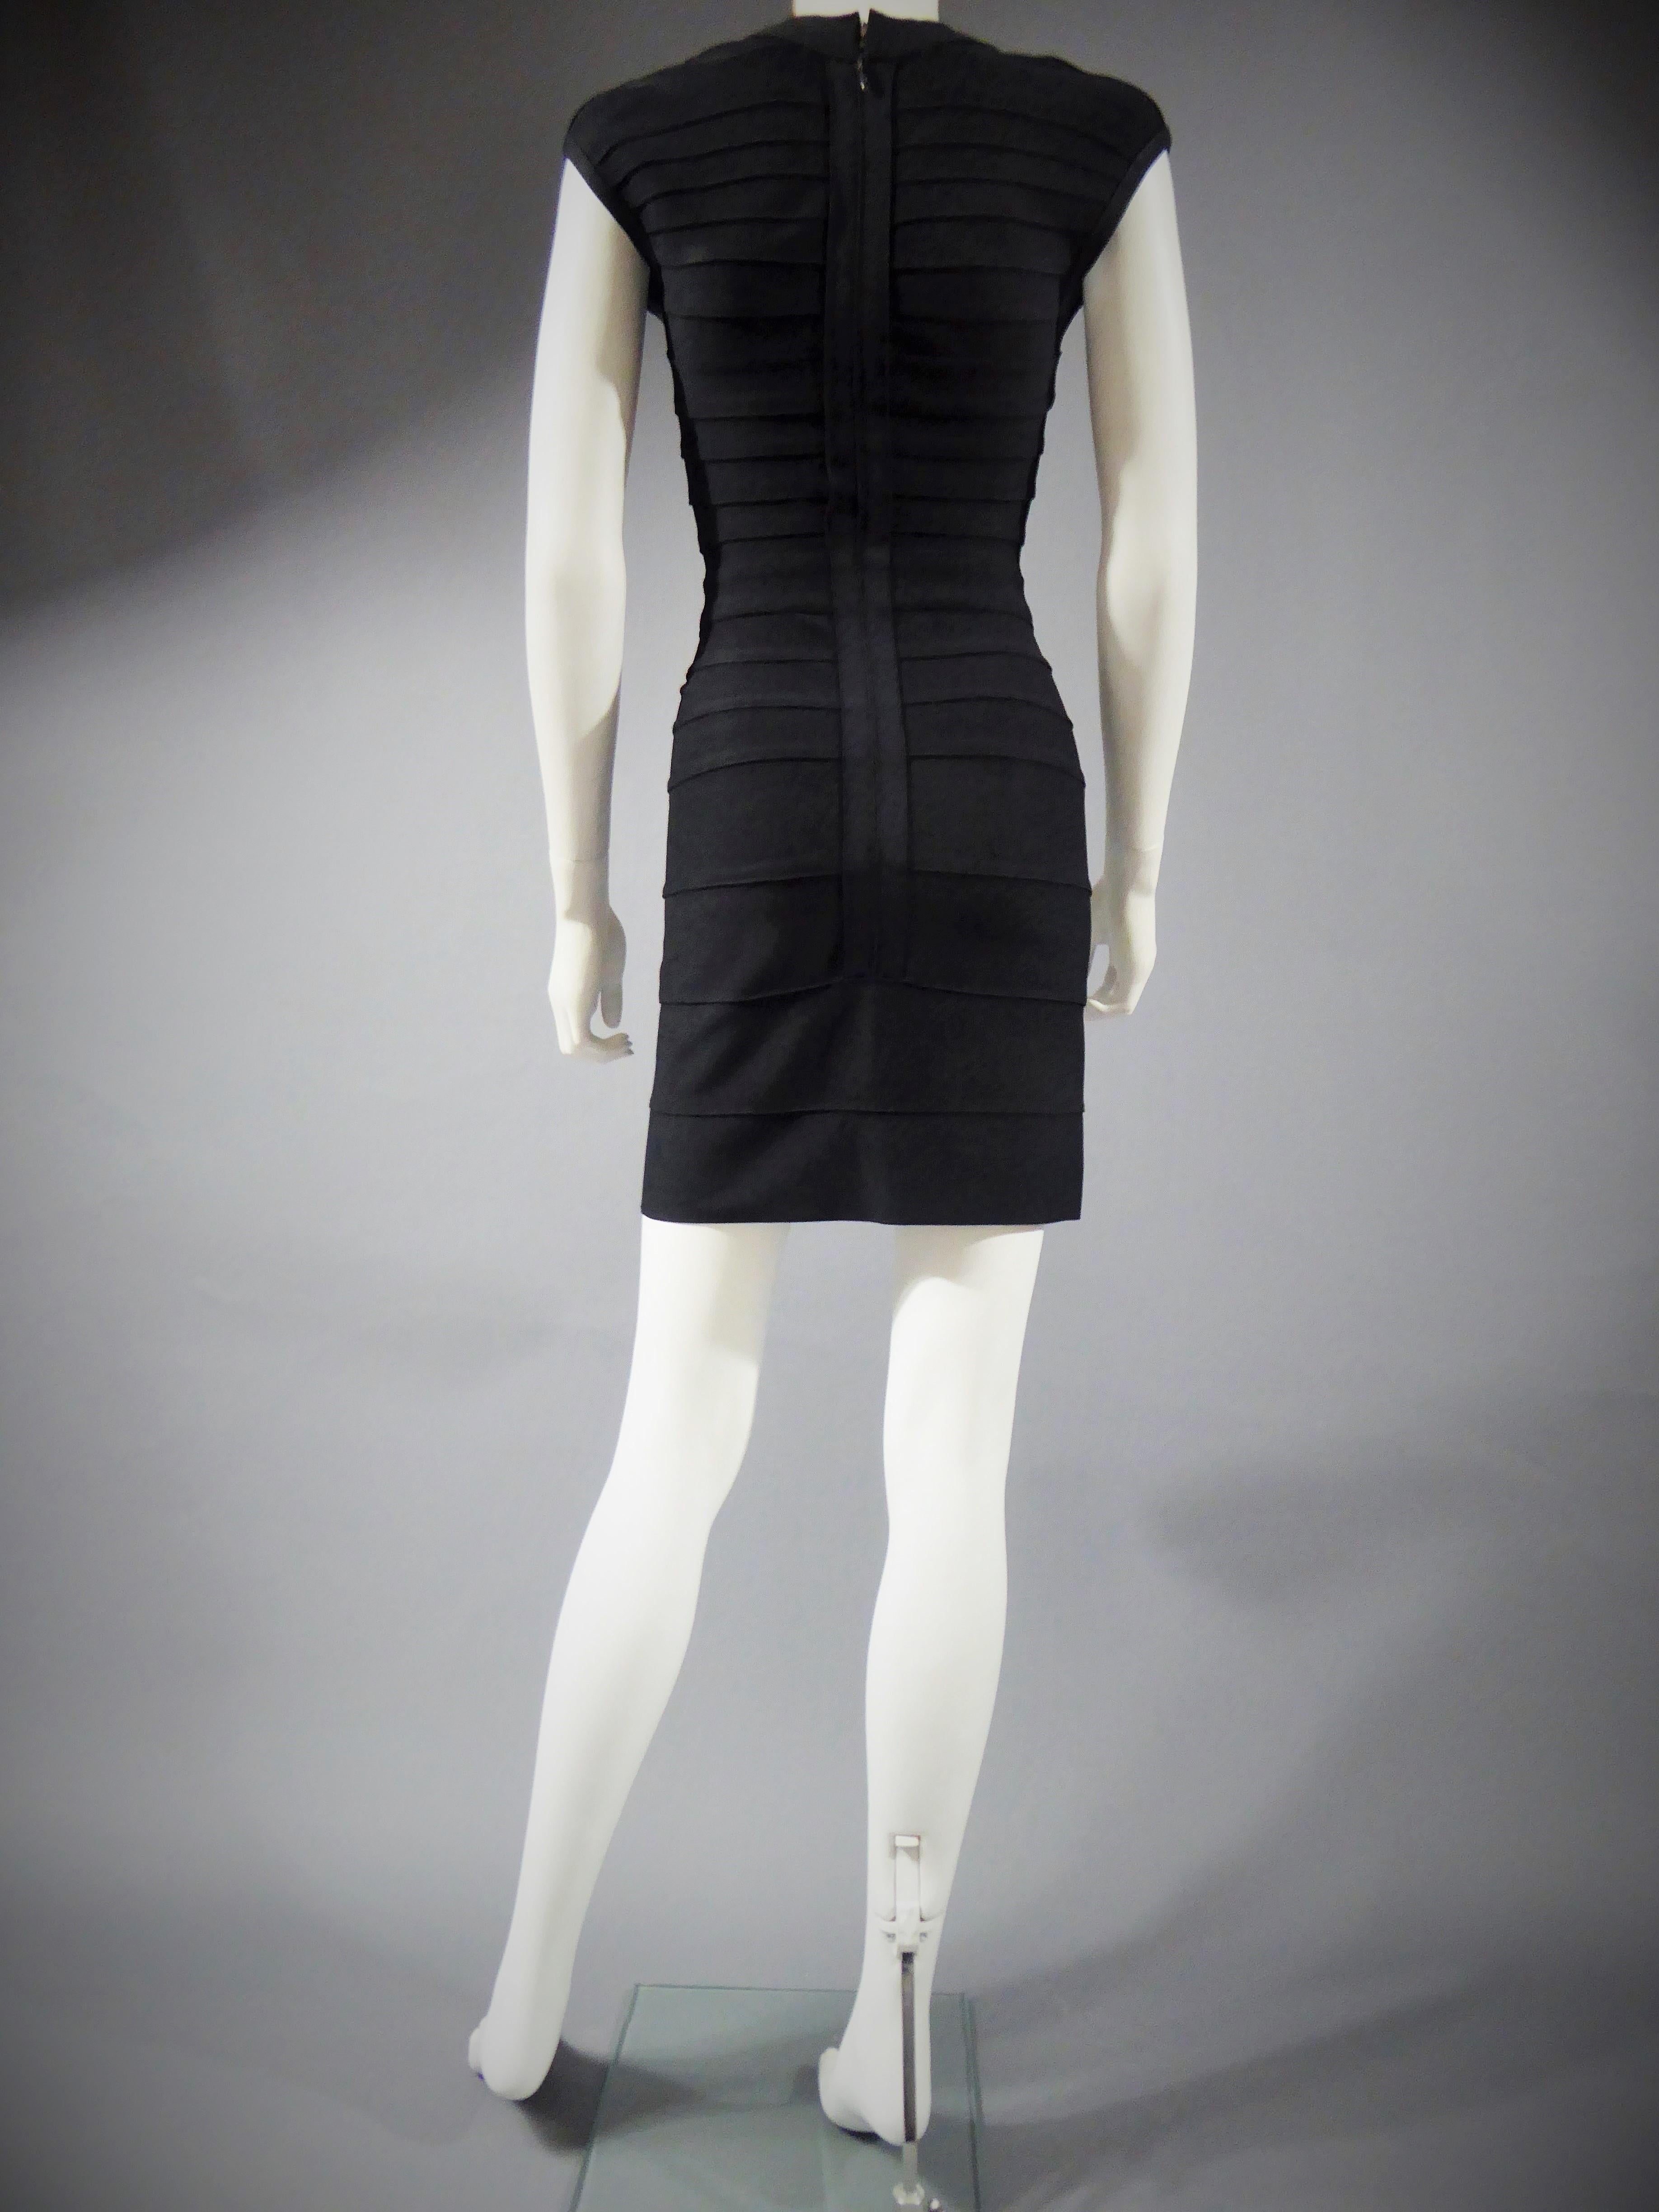 A French Hervé Léger Couture stretch Little black Dress Circa 1995 For Sale 4